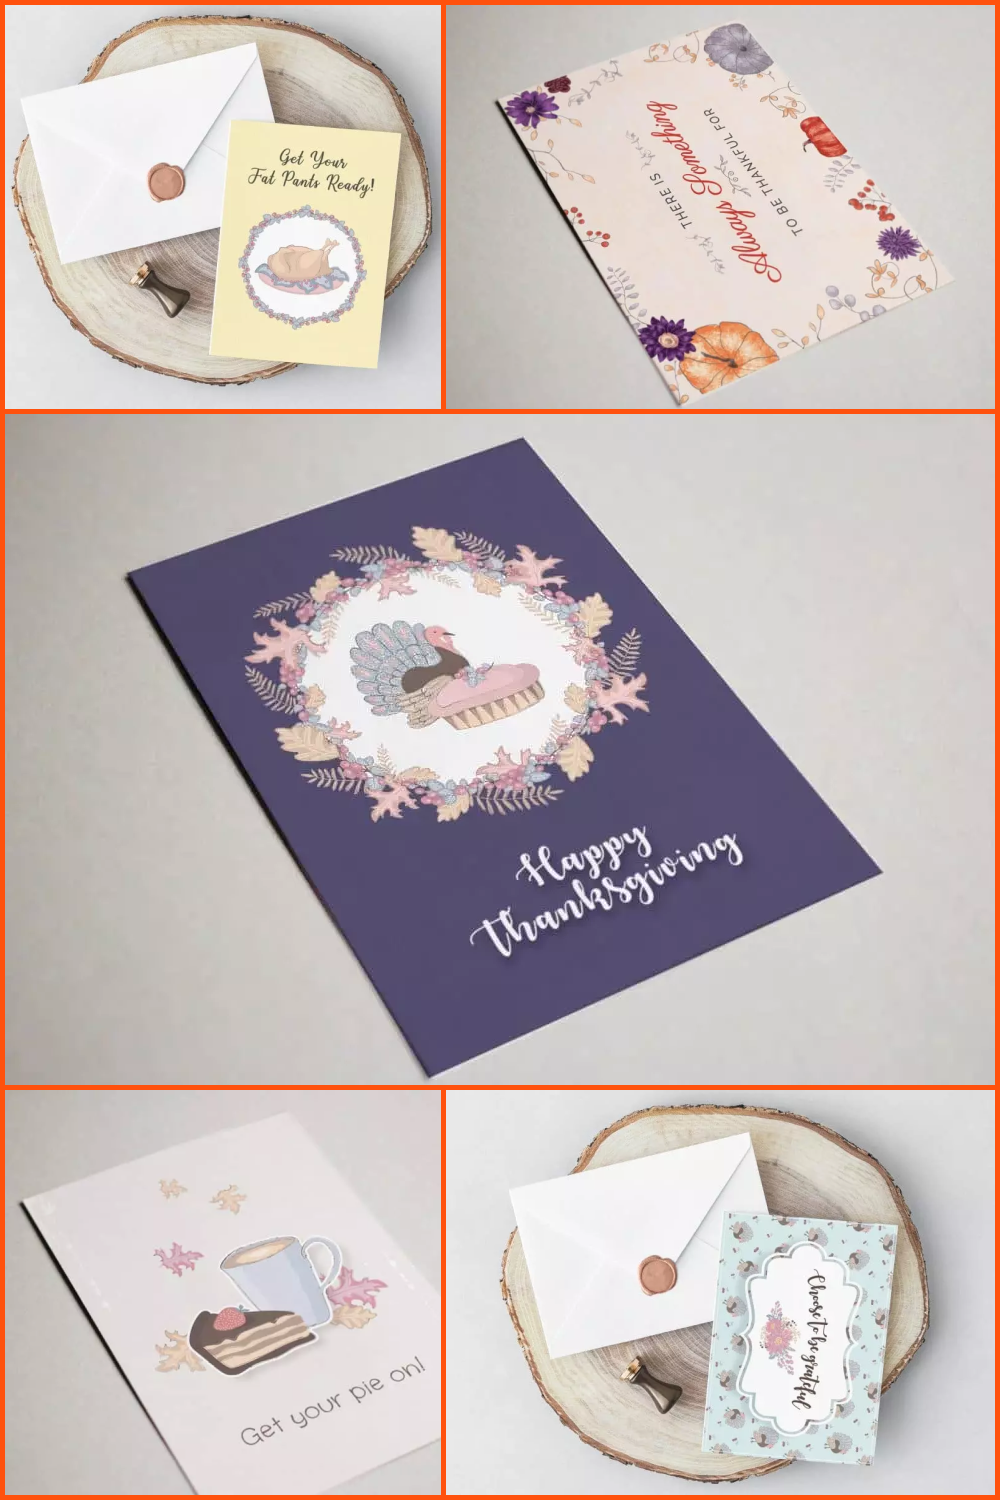 Thanksgiving cards collage with purple, beige and yellow background.